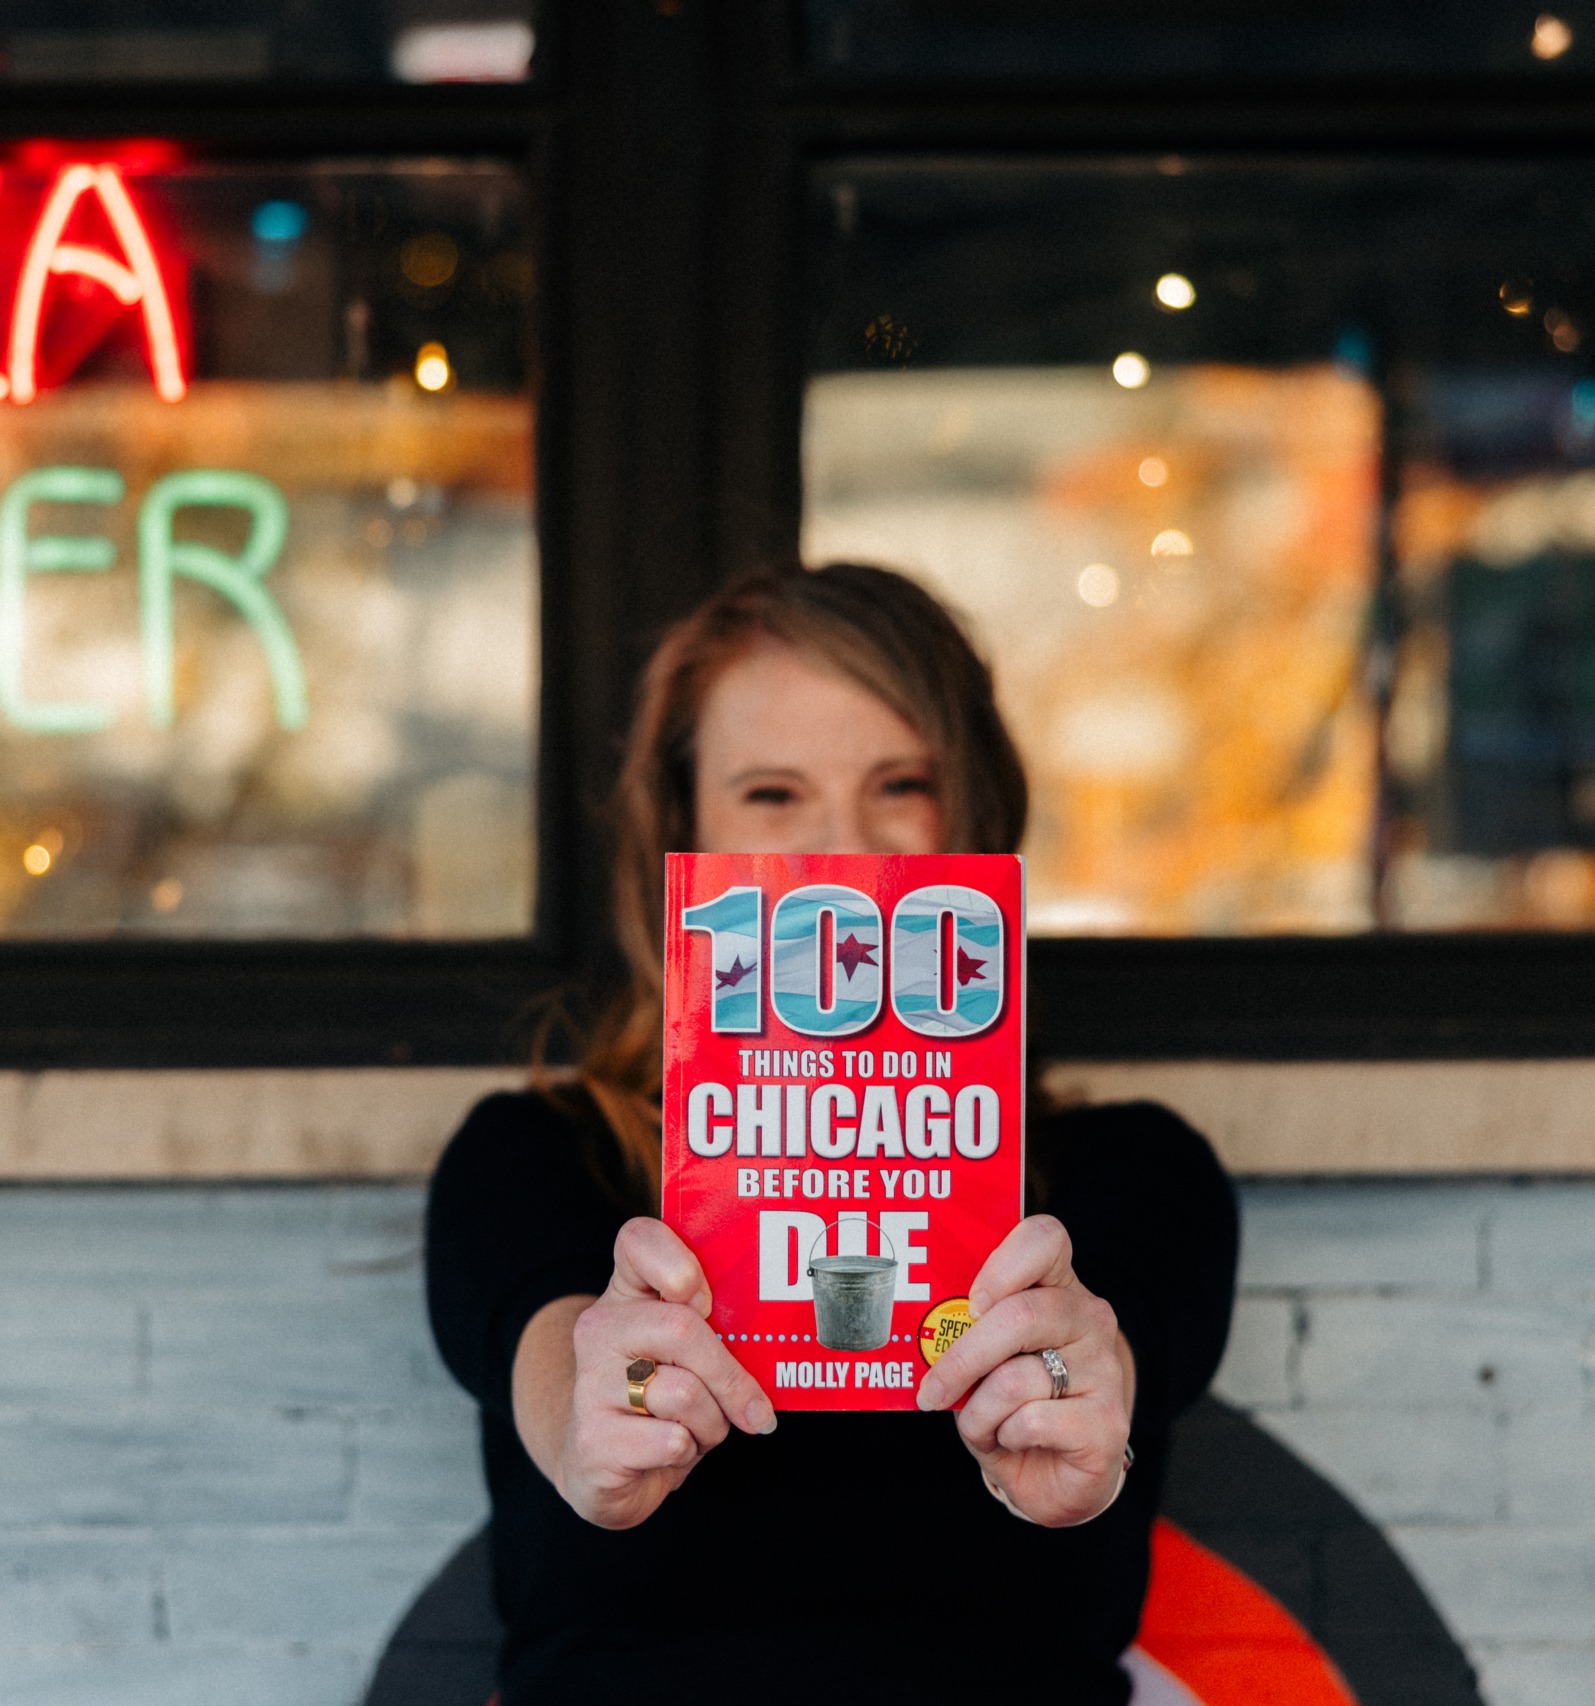 Author Molly Page shares cover of her book 100 Things to Do in Chicago Before you Die